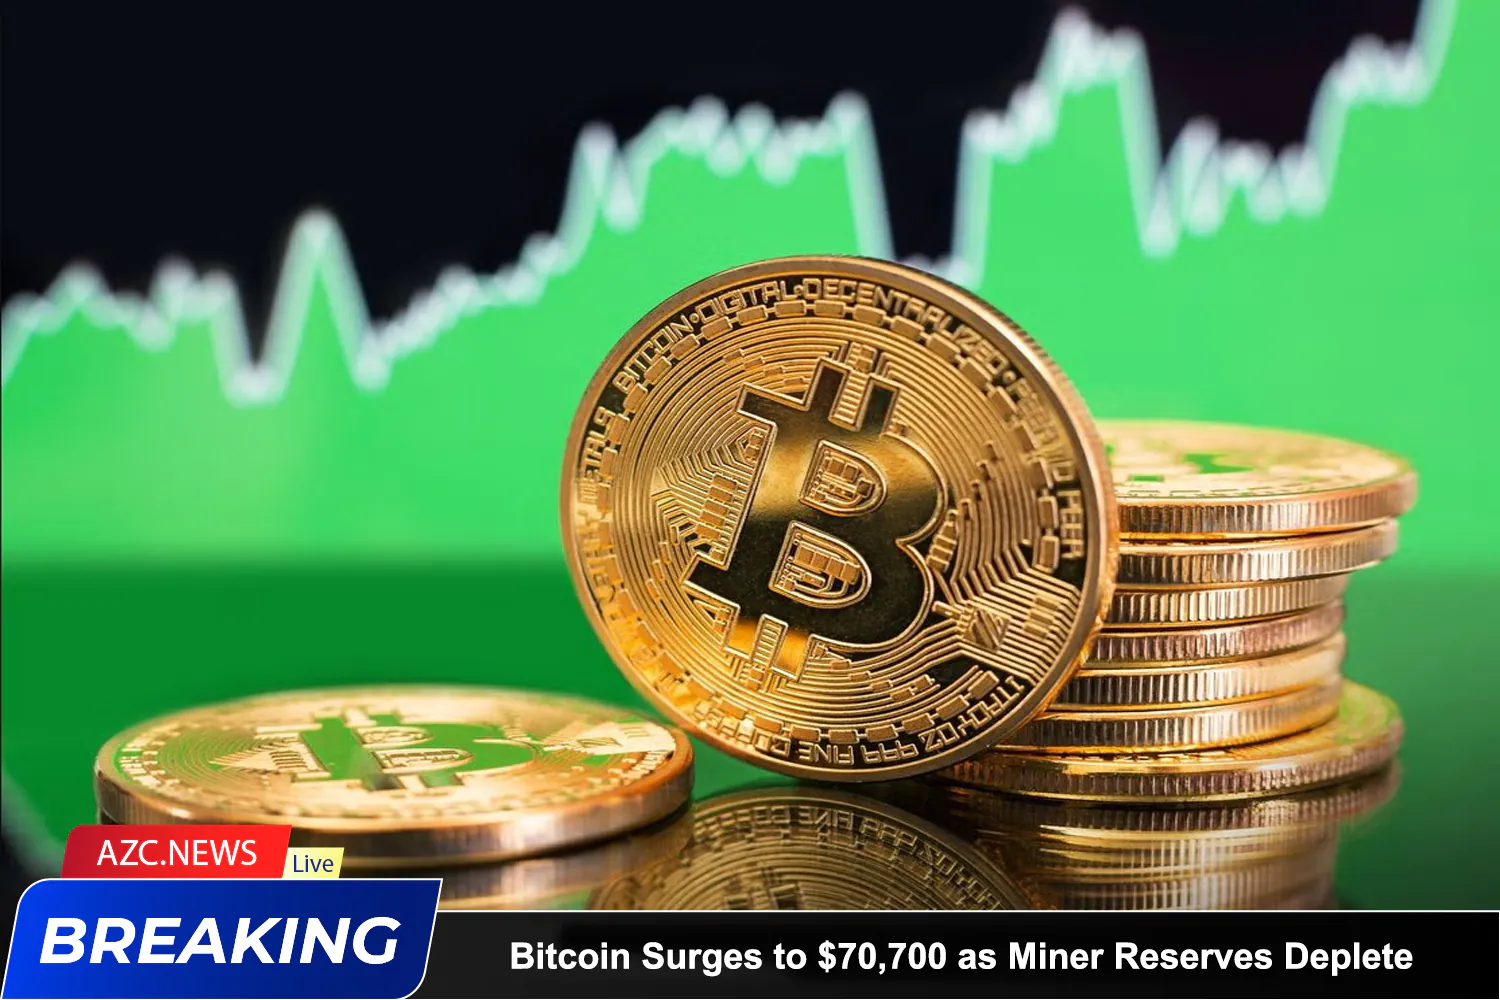 Azcnews Bitcoin Surges To $70,700 As Miner Reserves Deplete